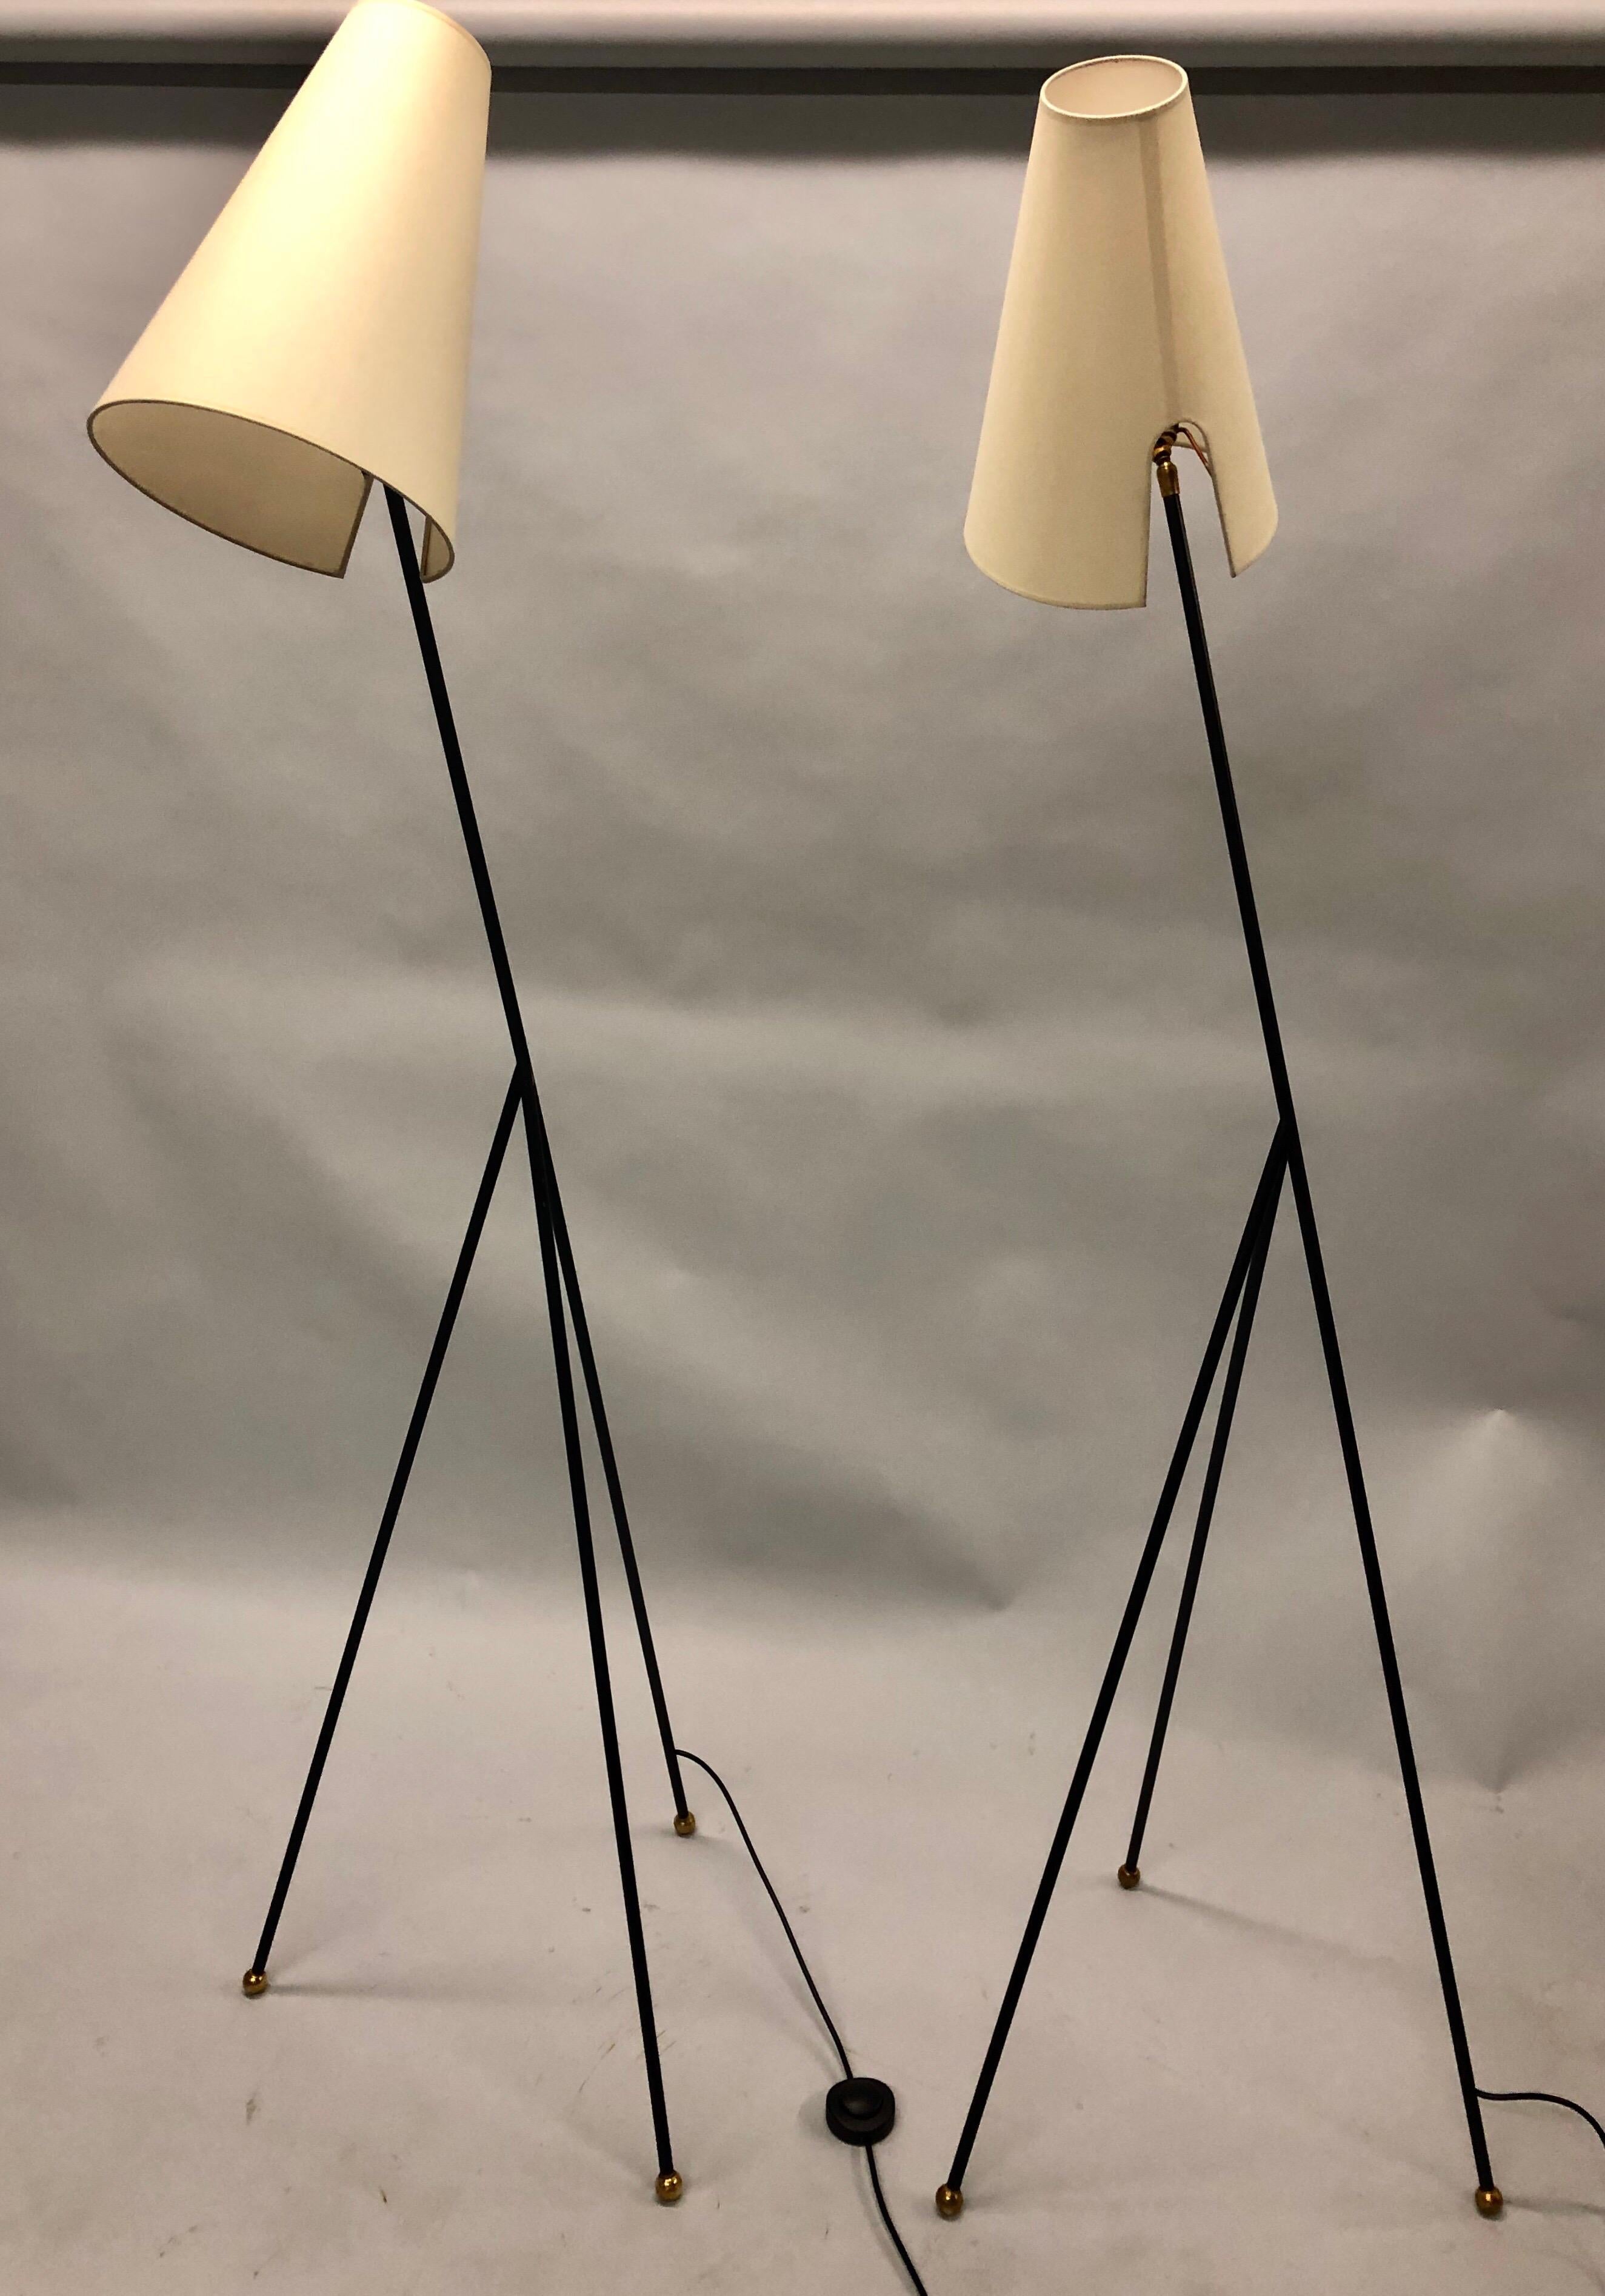 Elegant, sculptural pair of French Mid-Century Modern Style enameled wrought iron floor lamps in the style of Disderot

The standing lamps have a stunning triangulated form, elegant tapered legs terminating in brass ball finials and finished with